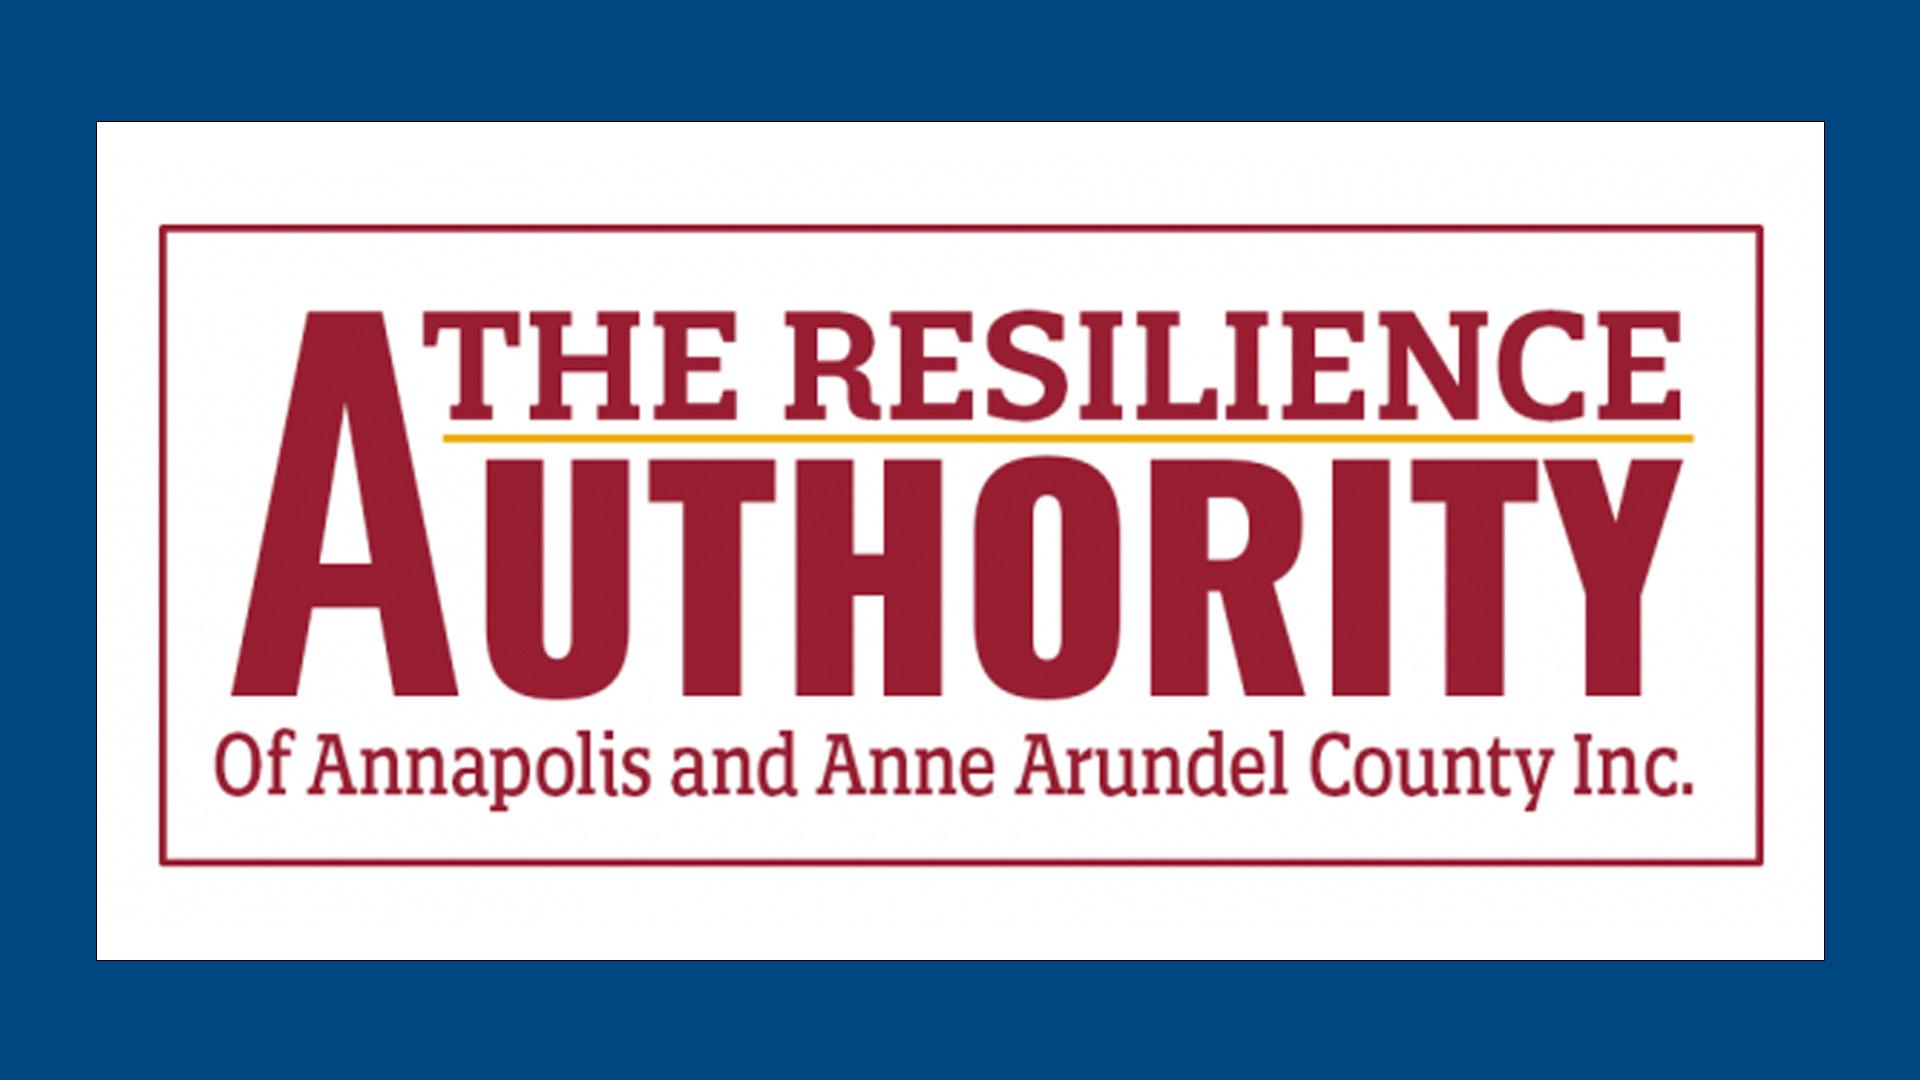 The Resilience Authority Logo